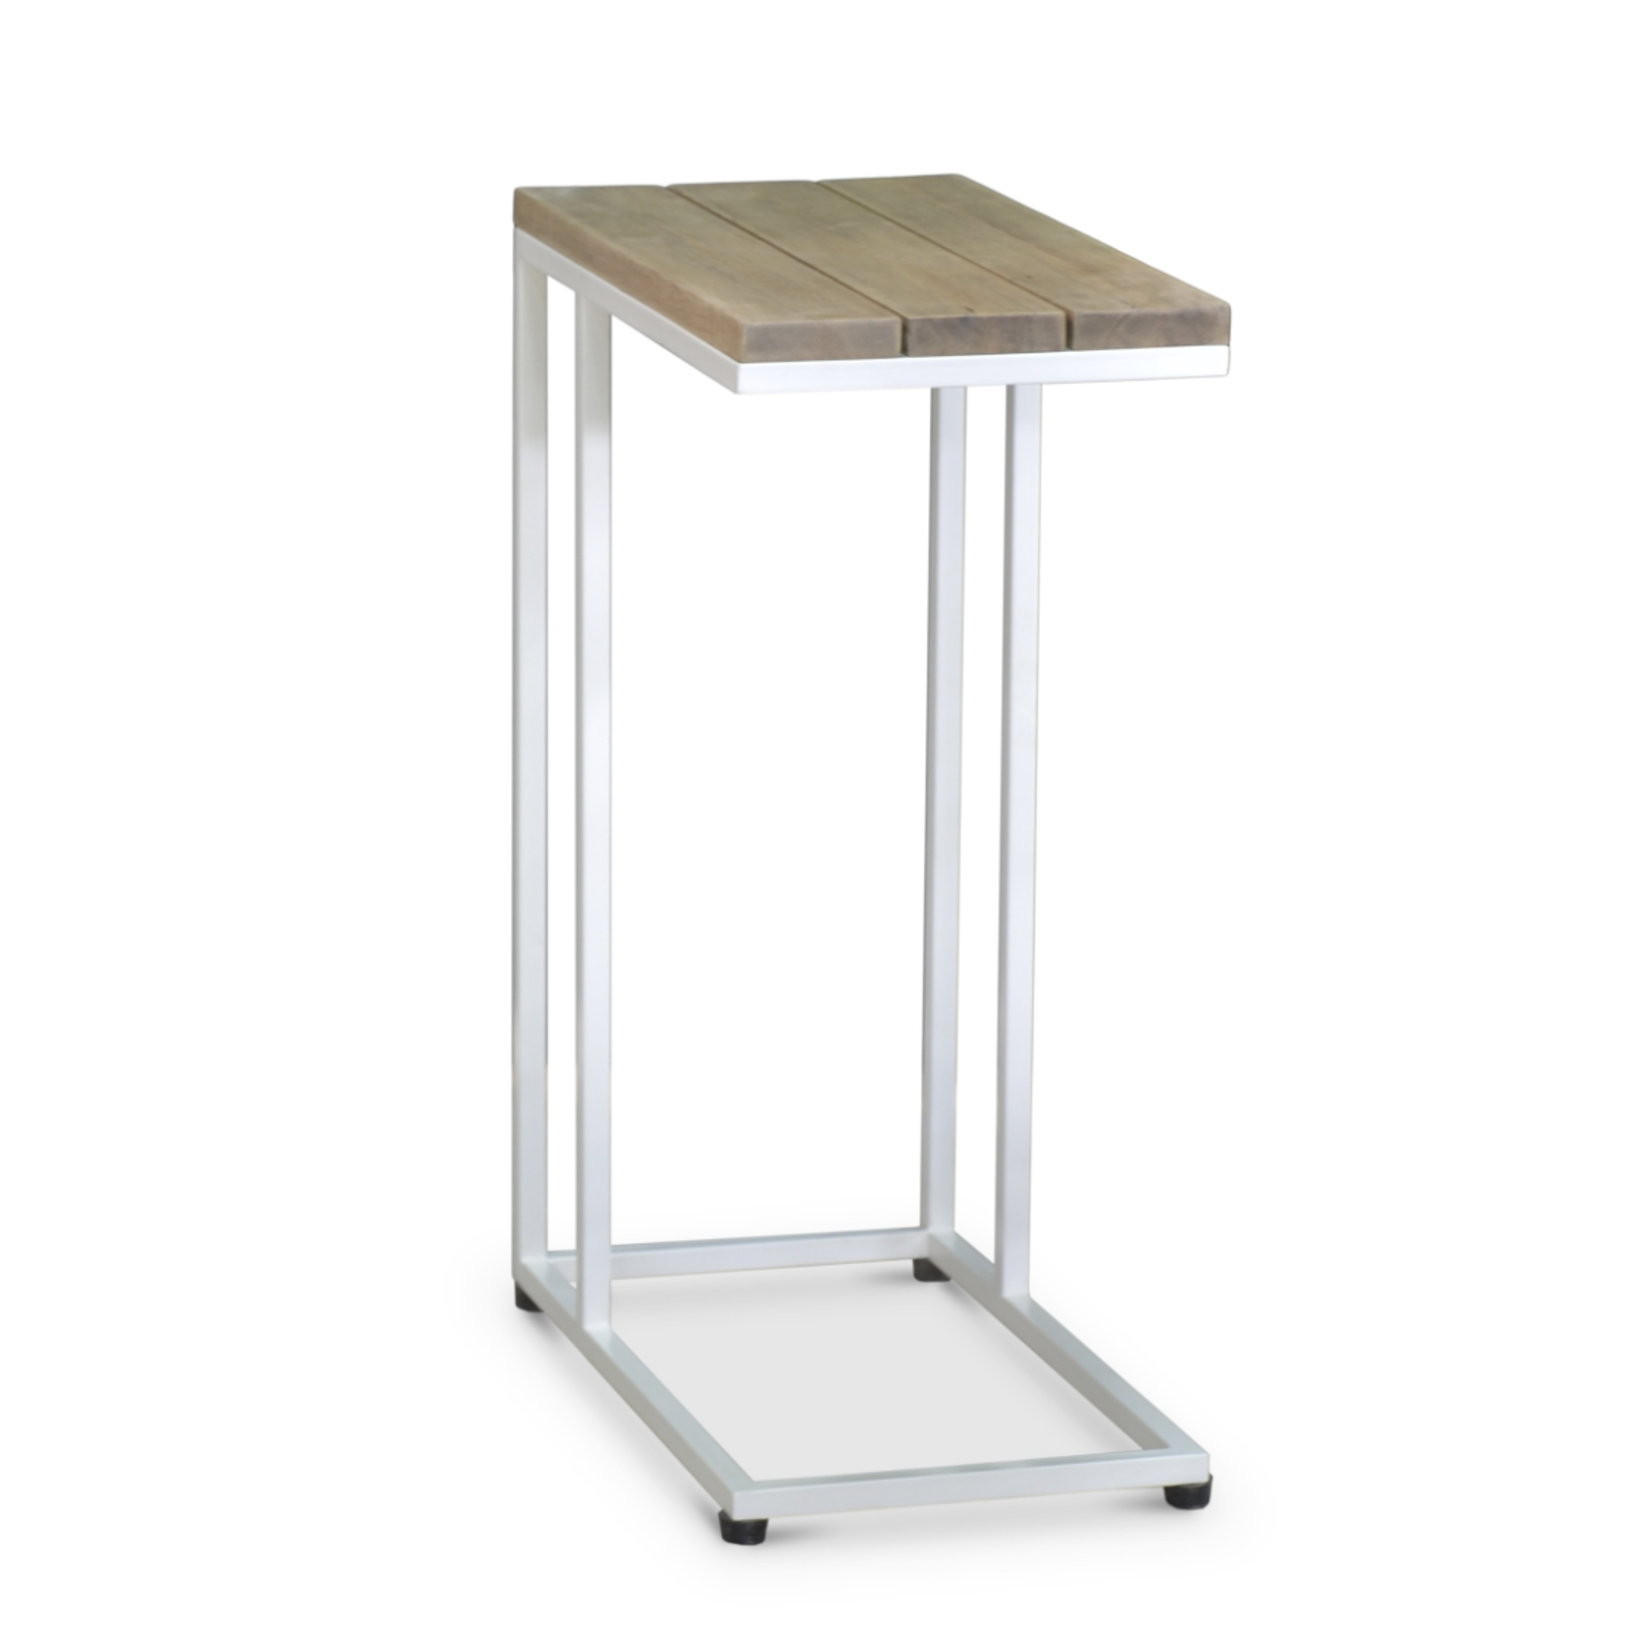 Outside The Box 18x10x24 Soma Smooth White C Table With Driftwood Mahogany Top